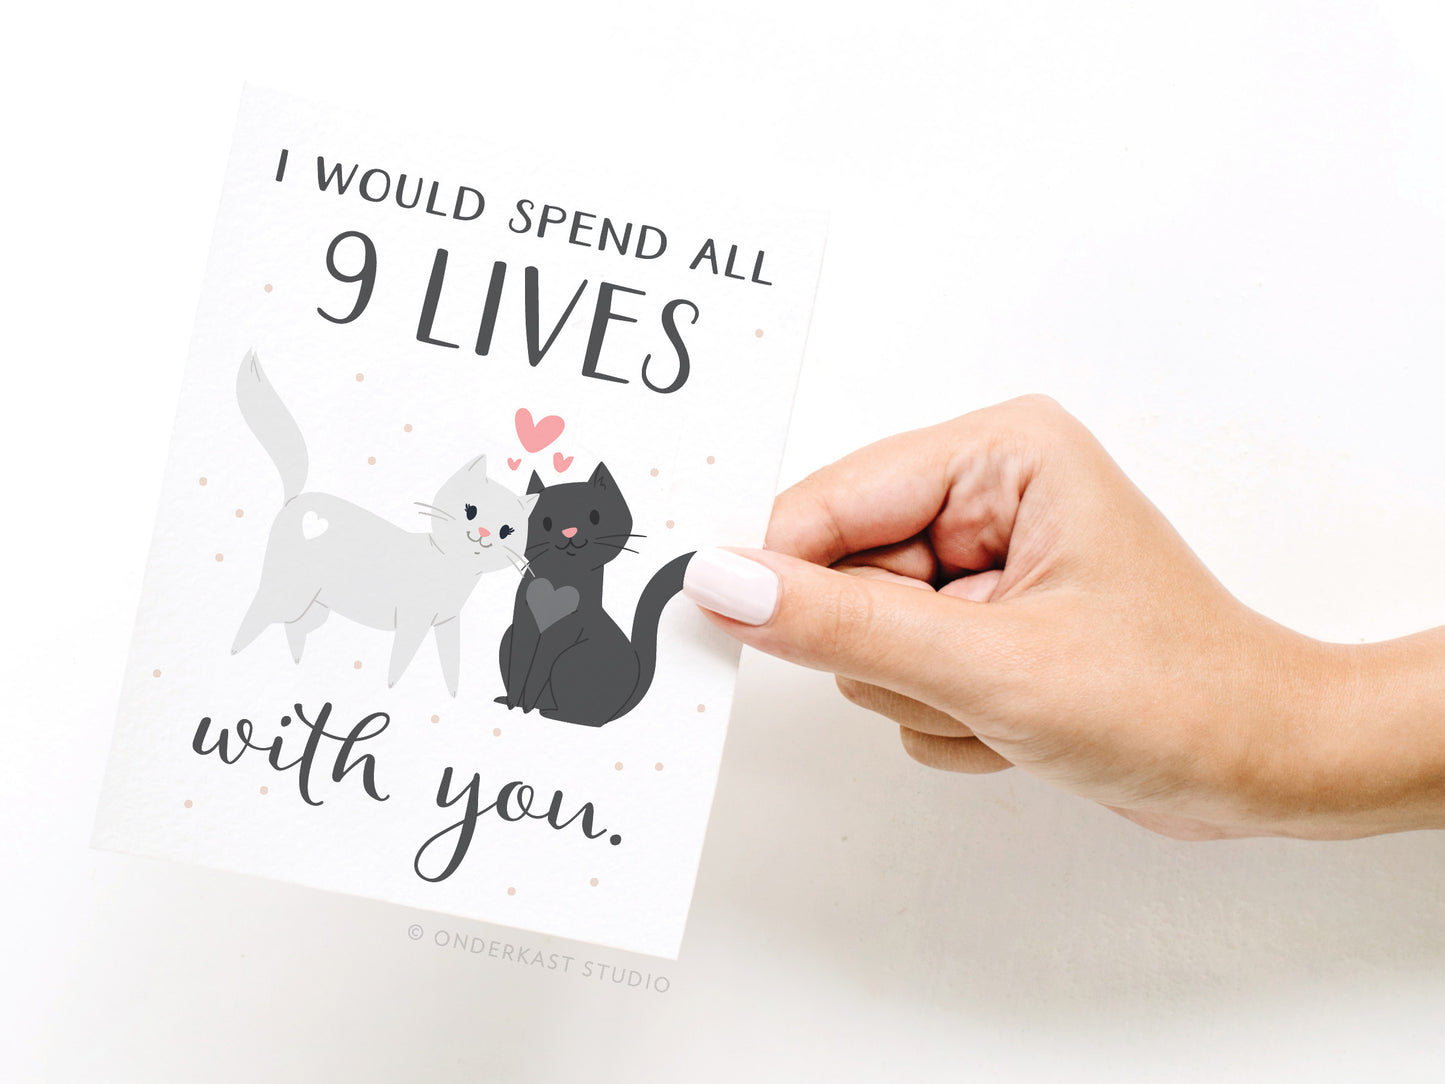 I Would Spend All 9 Lives With You Greeting Card